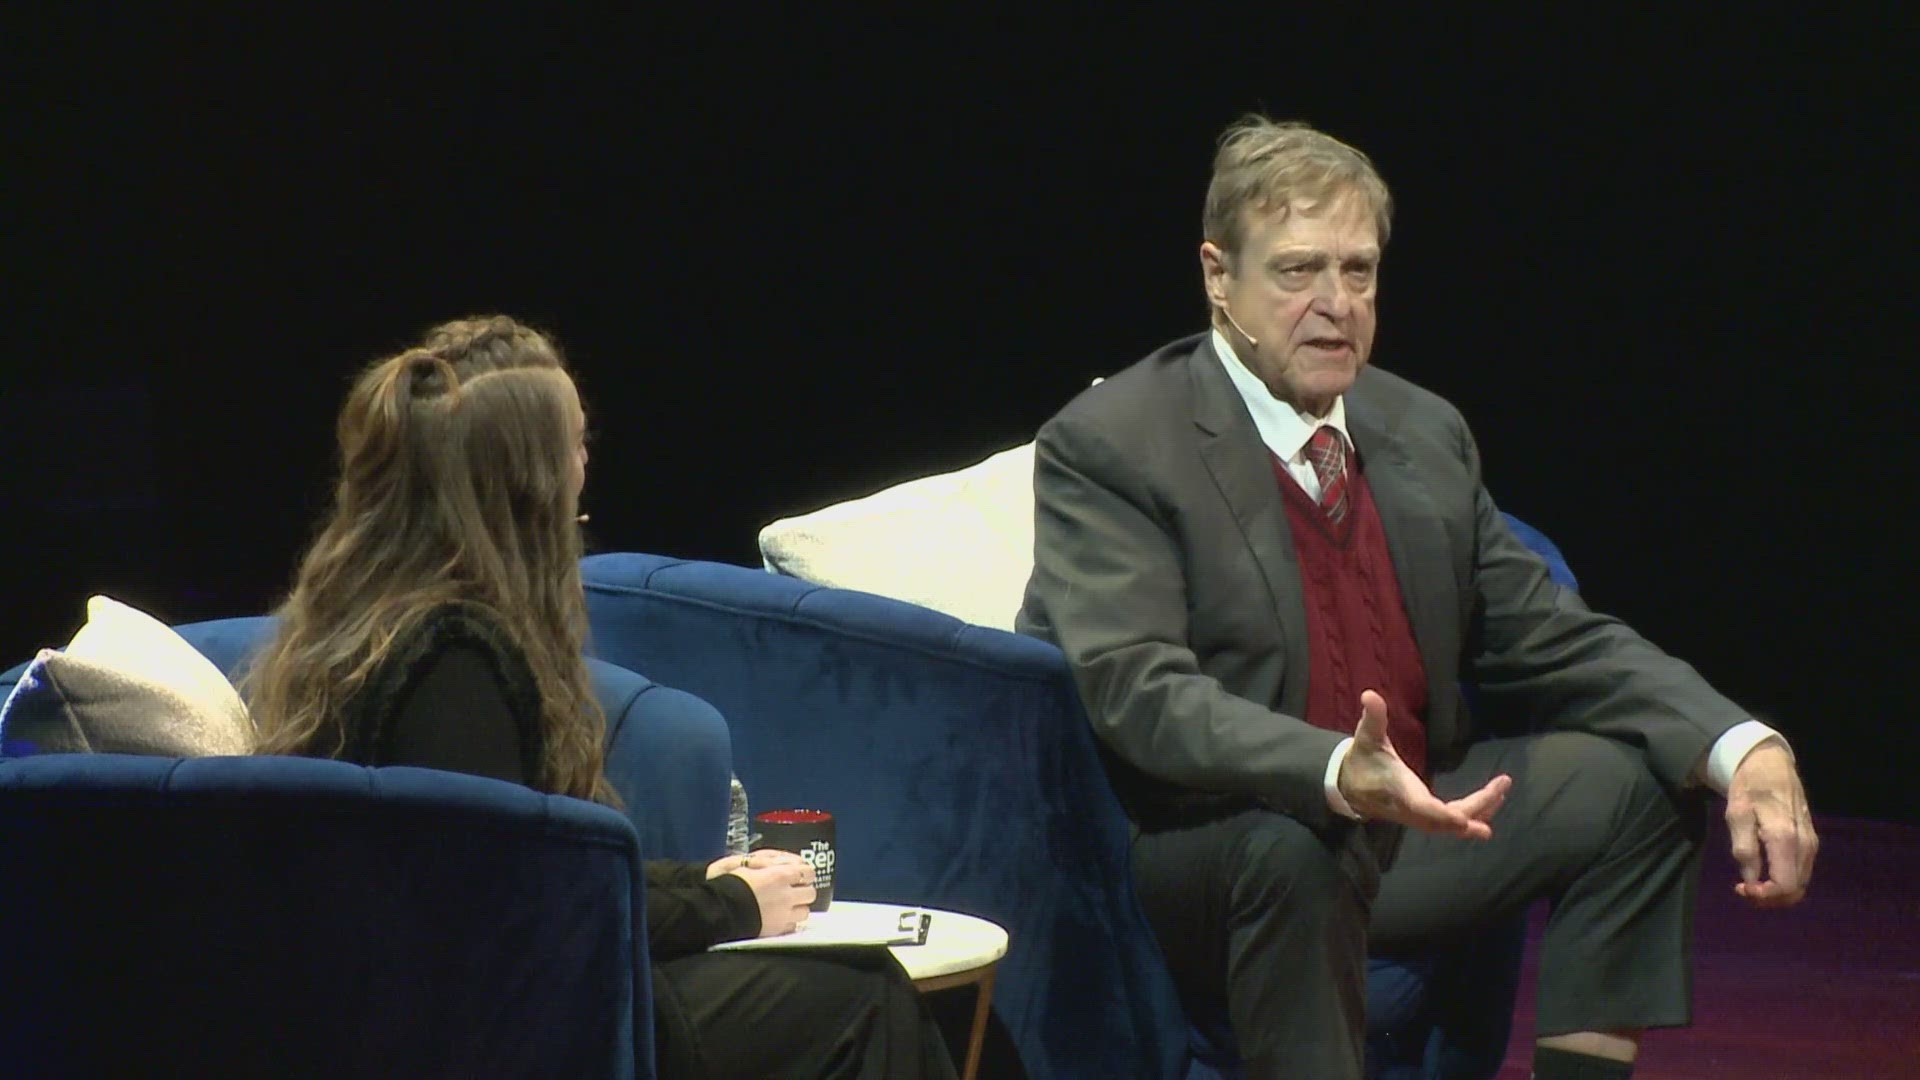 The theater community came together with the help of celebrity actor John Goodman for a special benefit performance to support the historic Repertory Theatre.